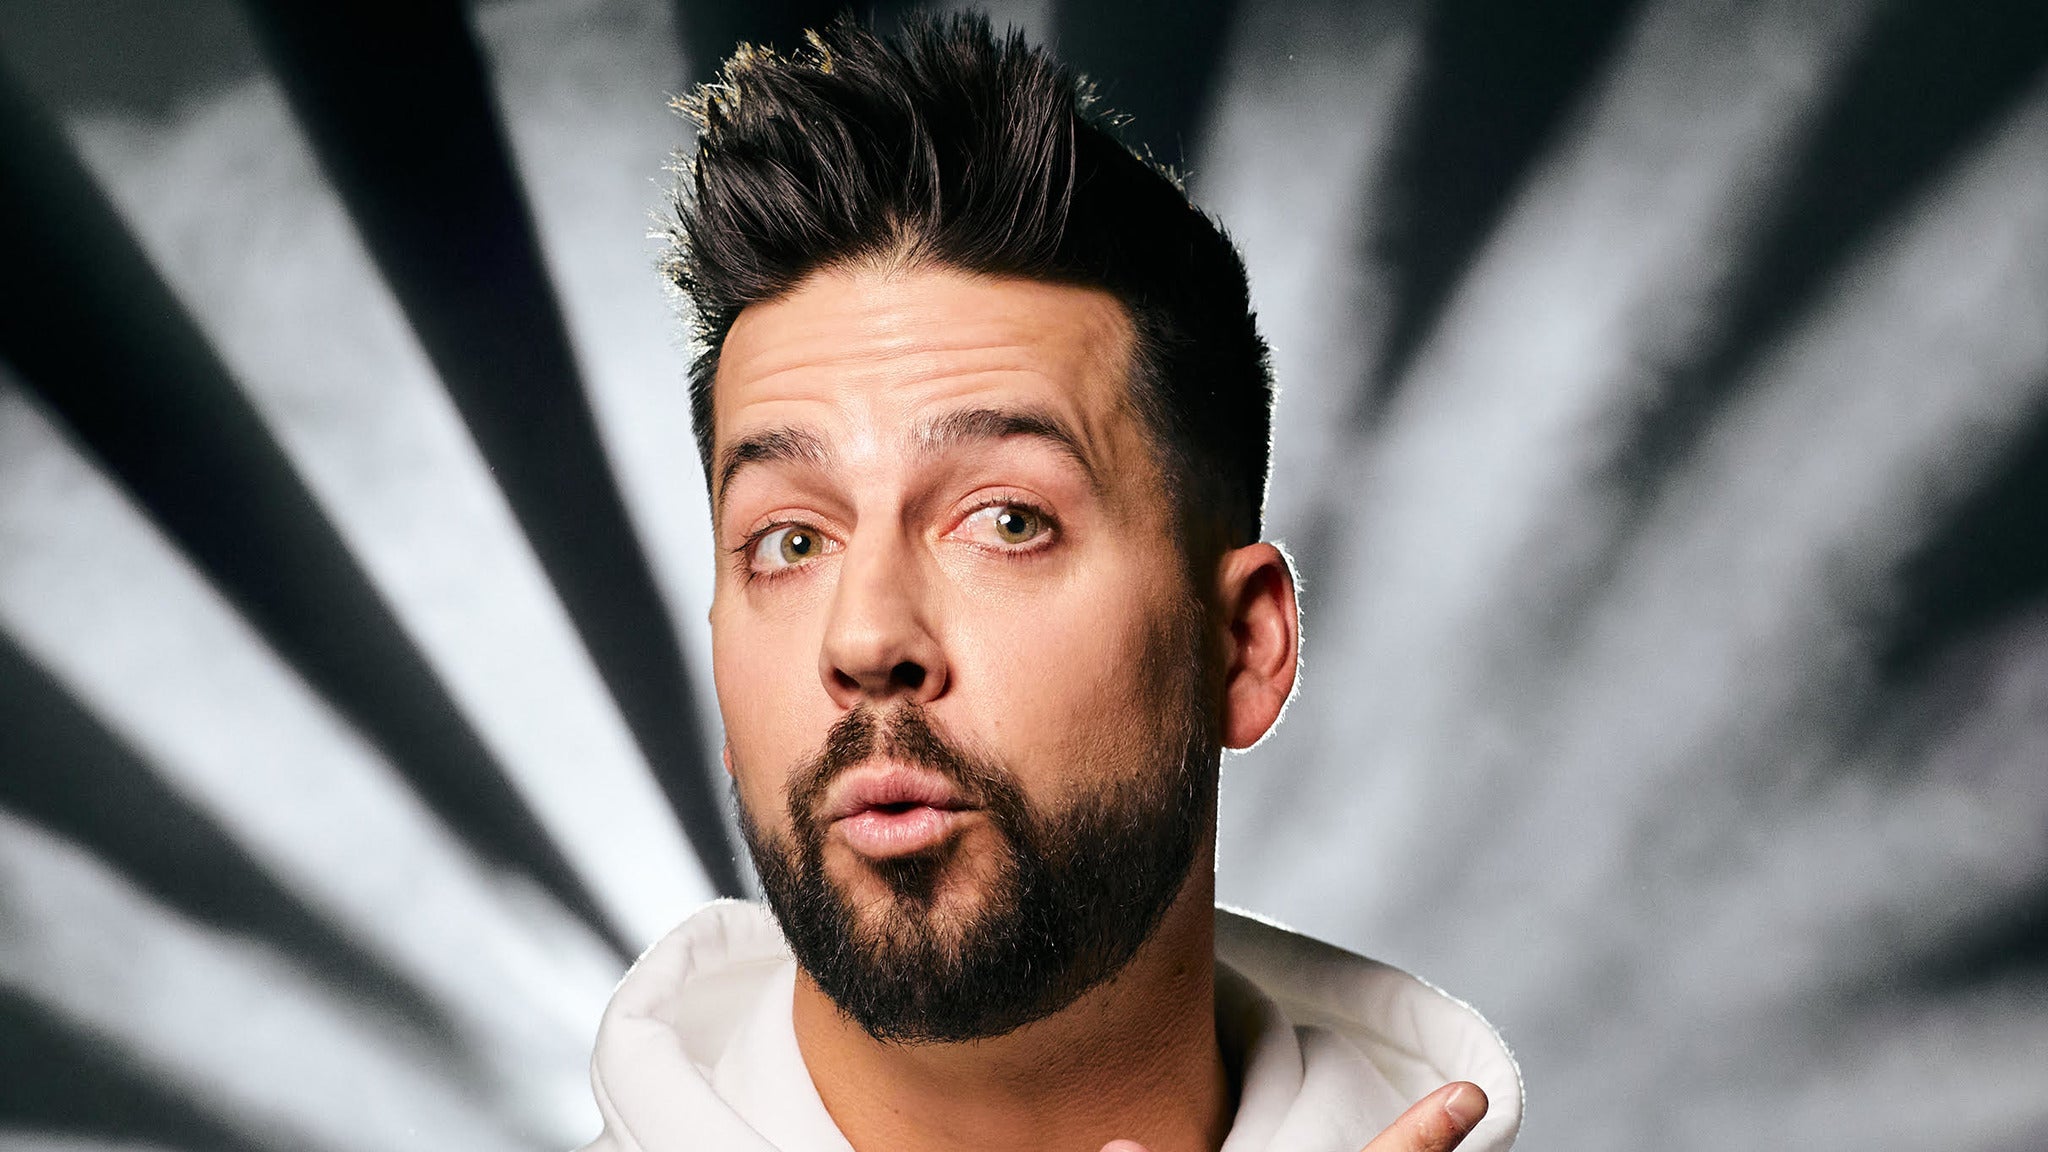 John Crist: The Emotional Support Tour at The Factory